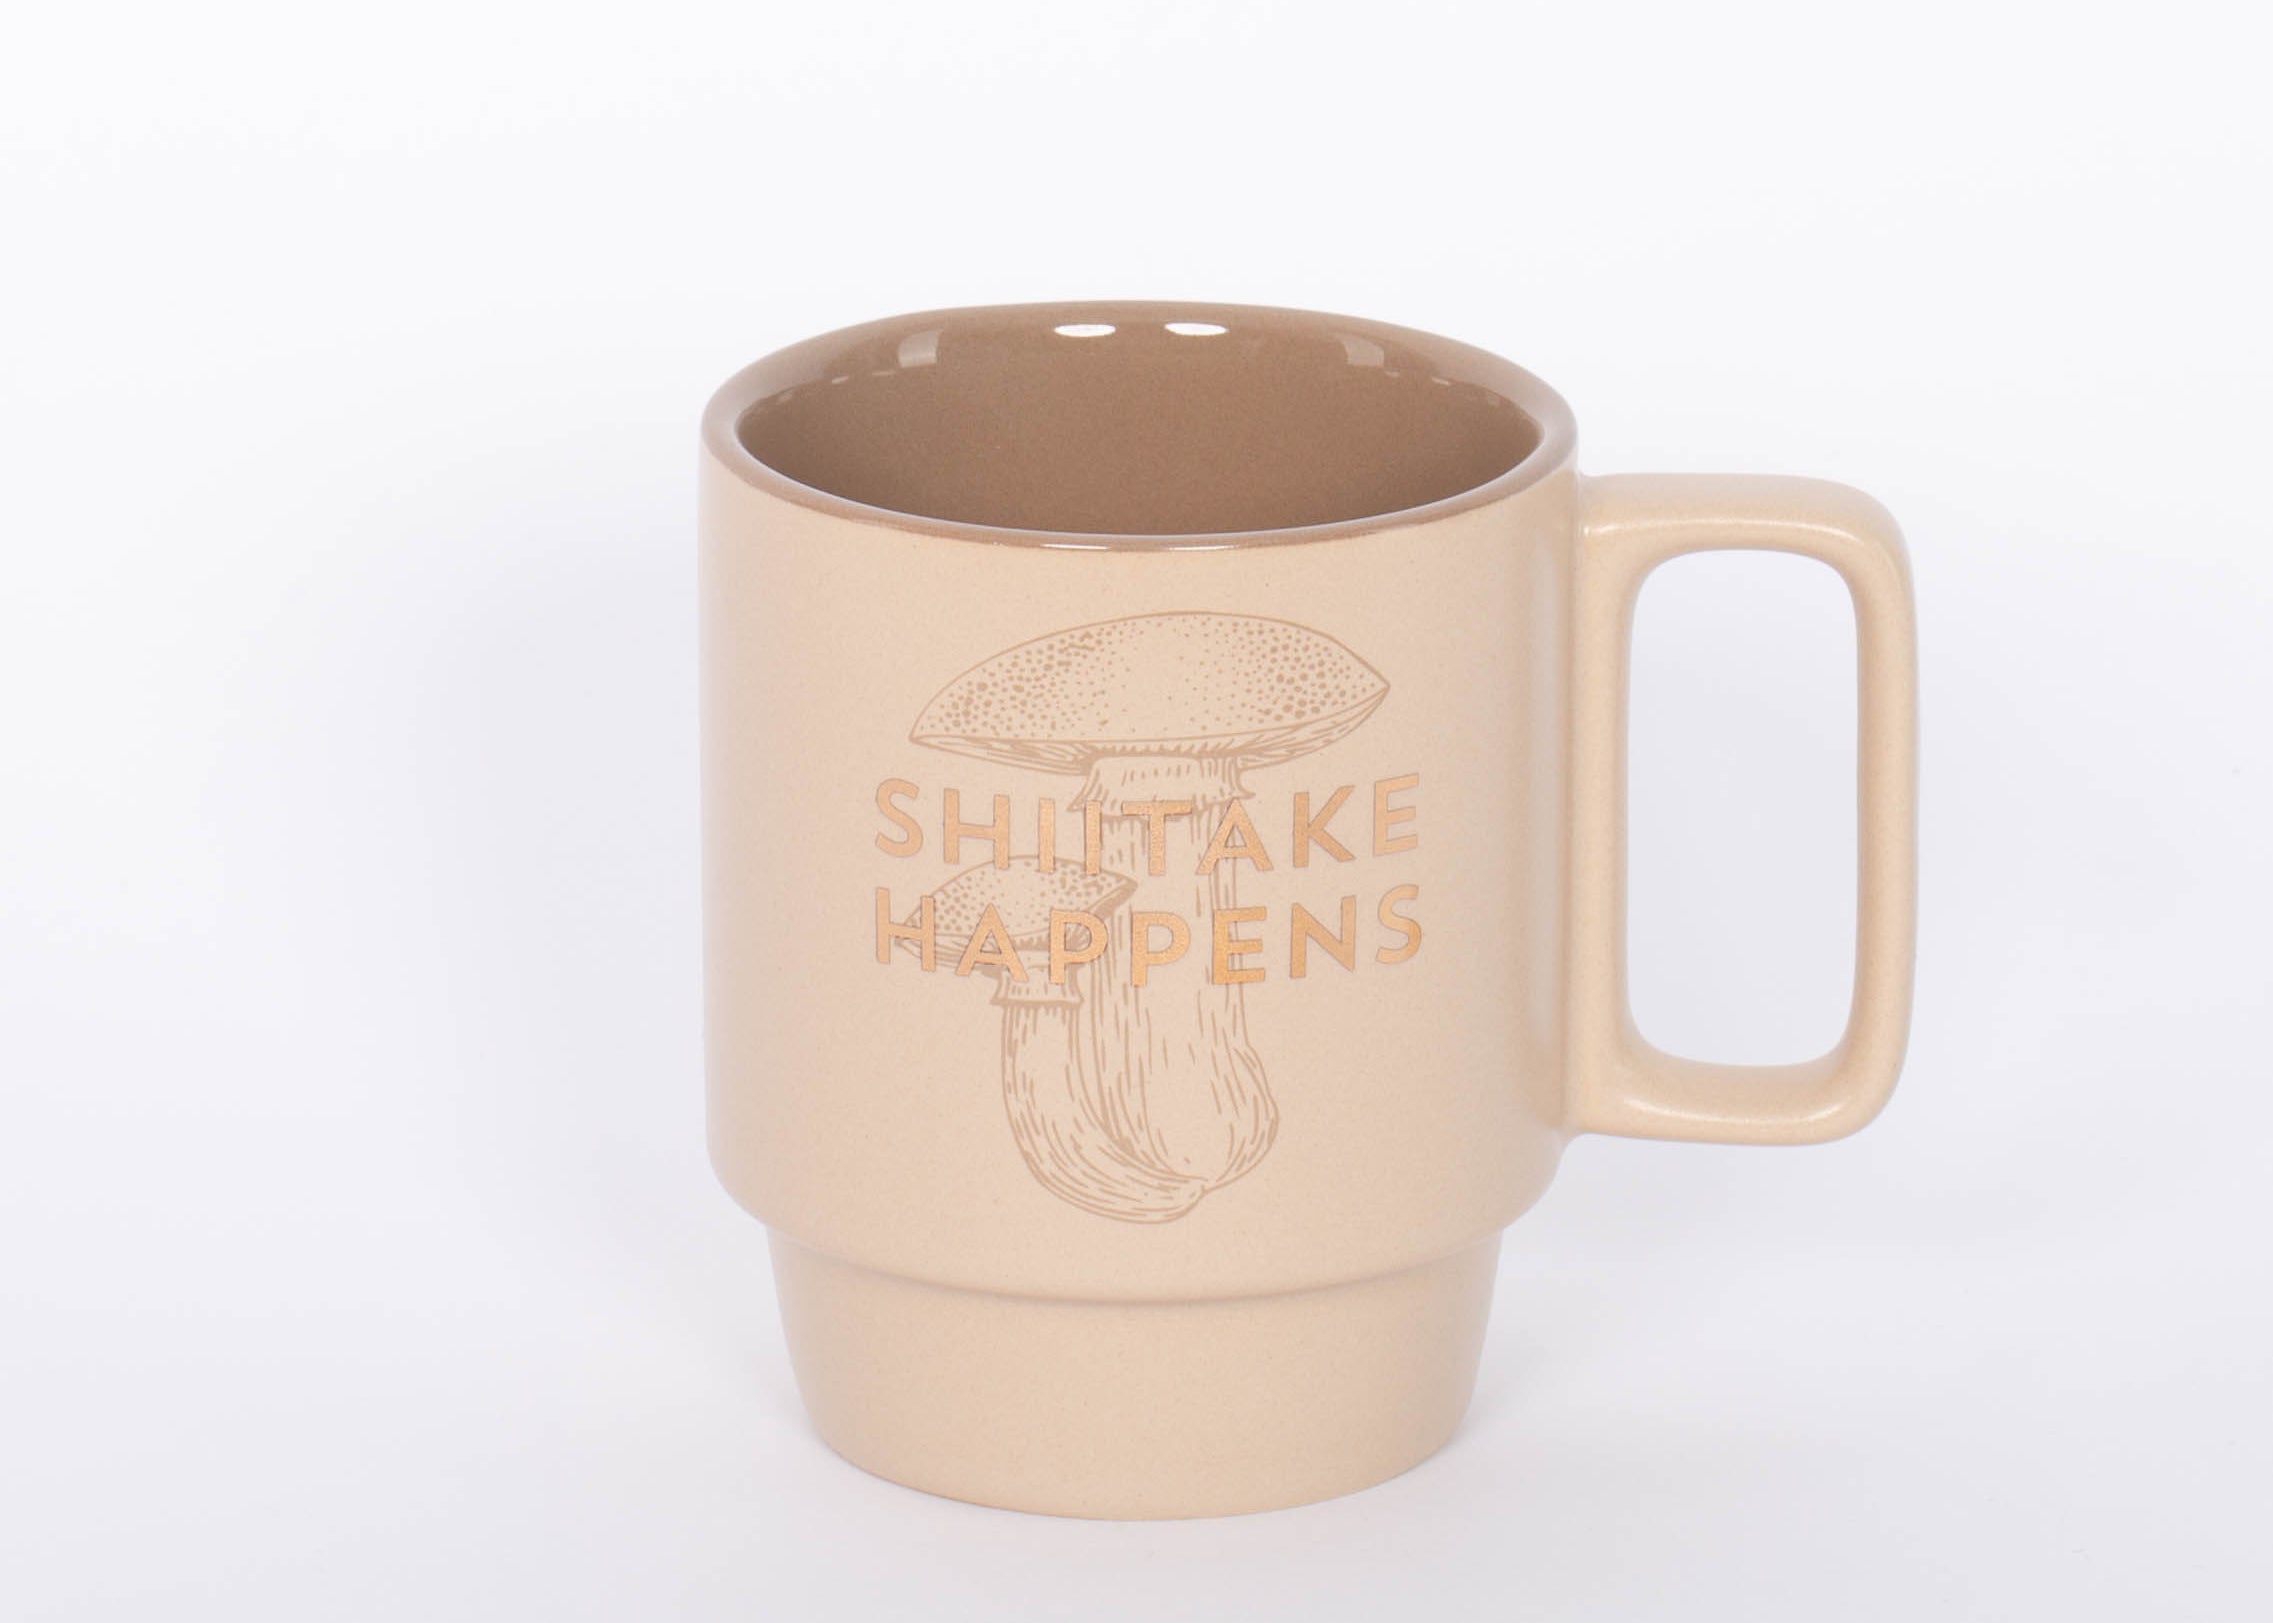 Shiitake Happens Mug. Crafted of high-quality ceramic, this stackable mug features a sassy sentiment in metallic gold lettering. This 12 oz. mushroom mug is the perfect companion to your morning routine whether it's for a cup of coffee, hot cocoa, or tea. It also makes a great gift for the mushroom lover in your life!